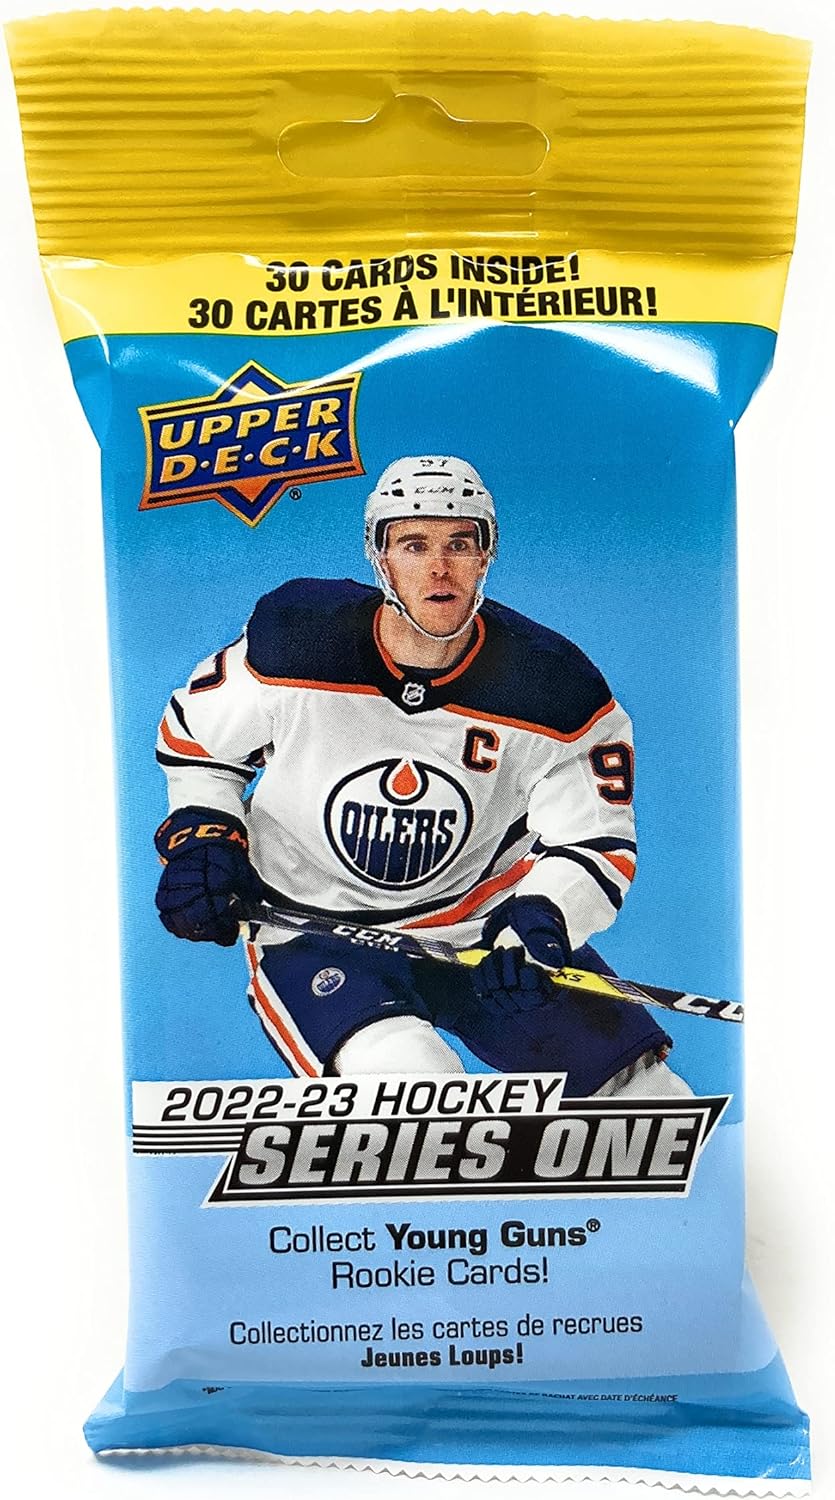 Upper Deck Hockey 2022-23 Series 1 Hockey Card Fat Pack (Contains 30 Hockey Cards)